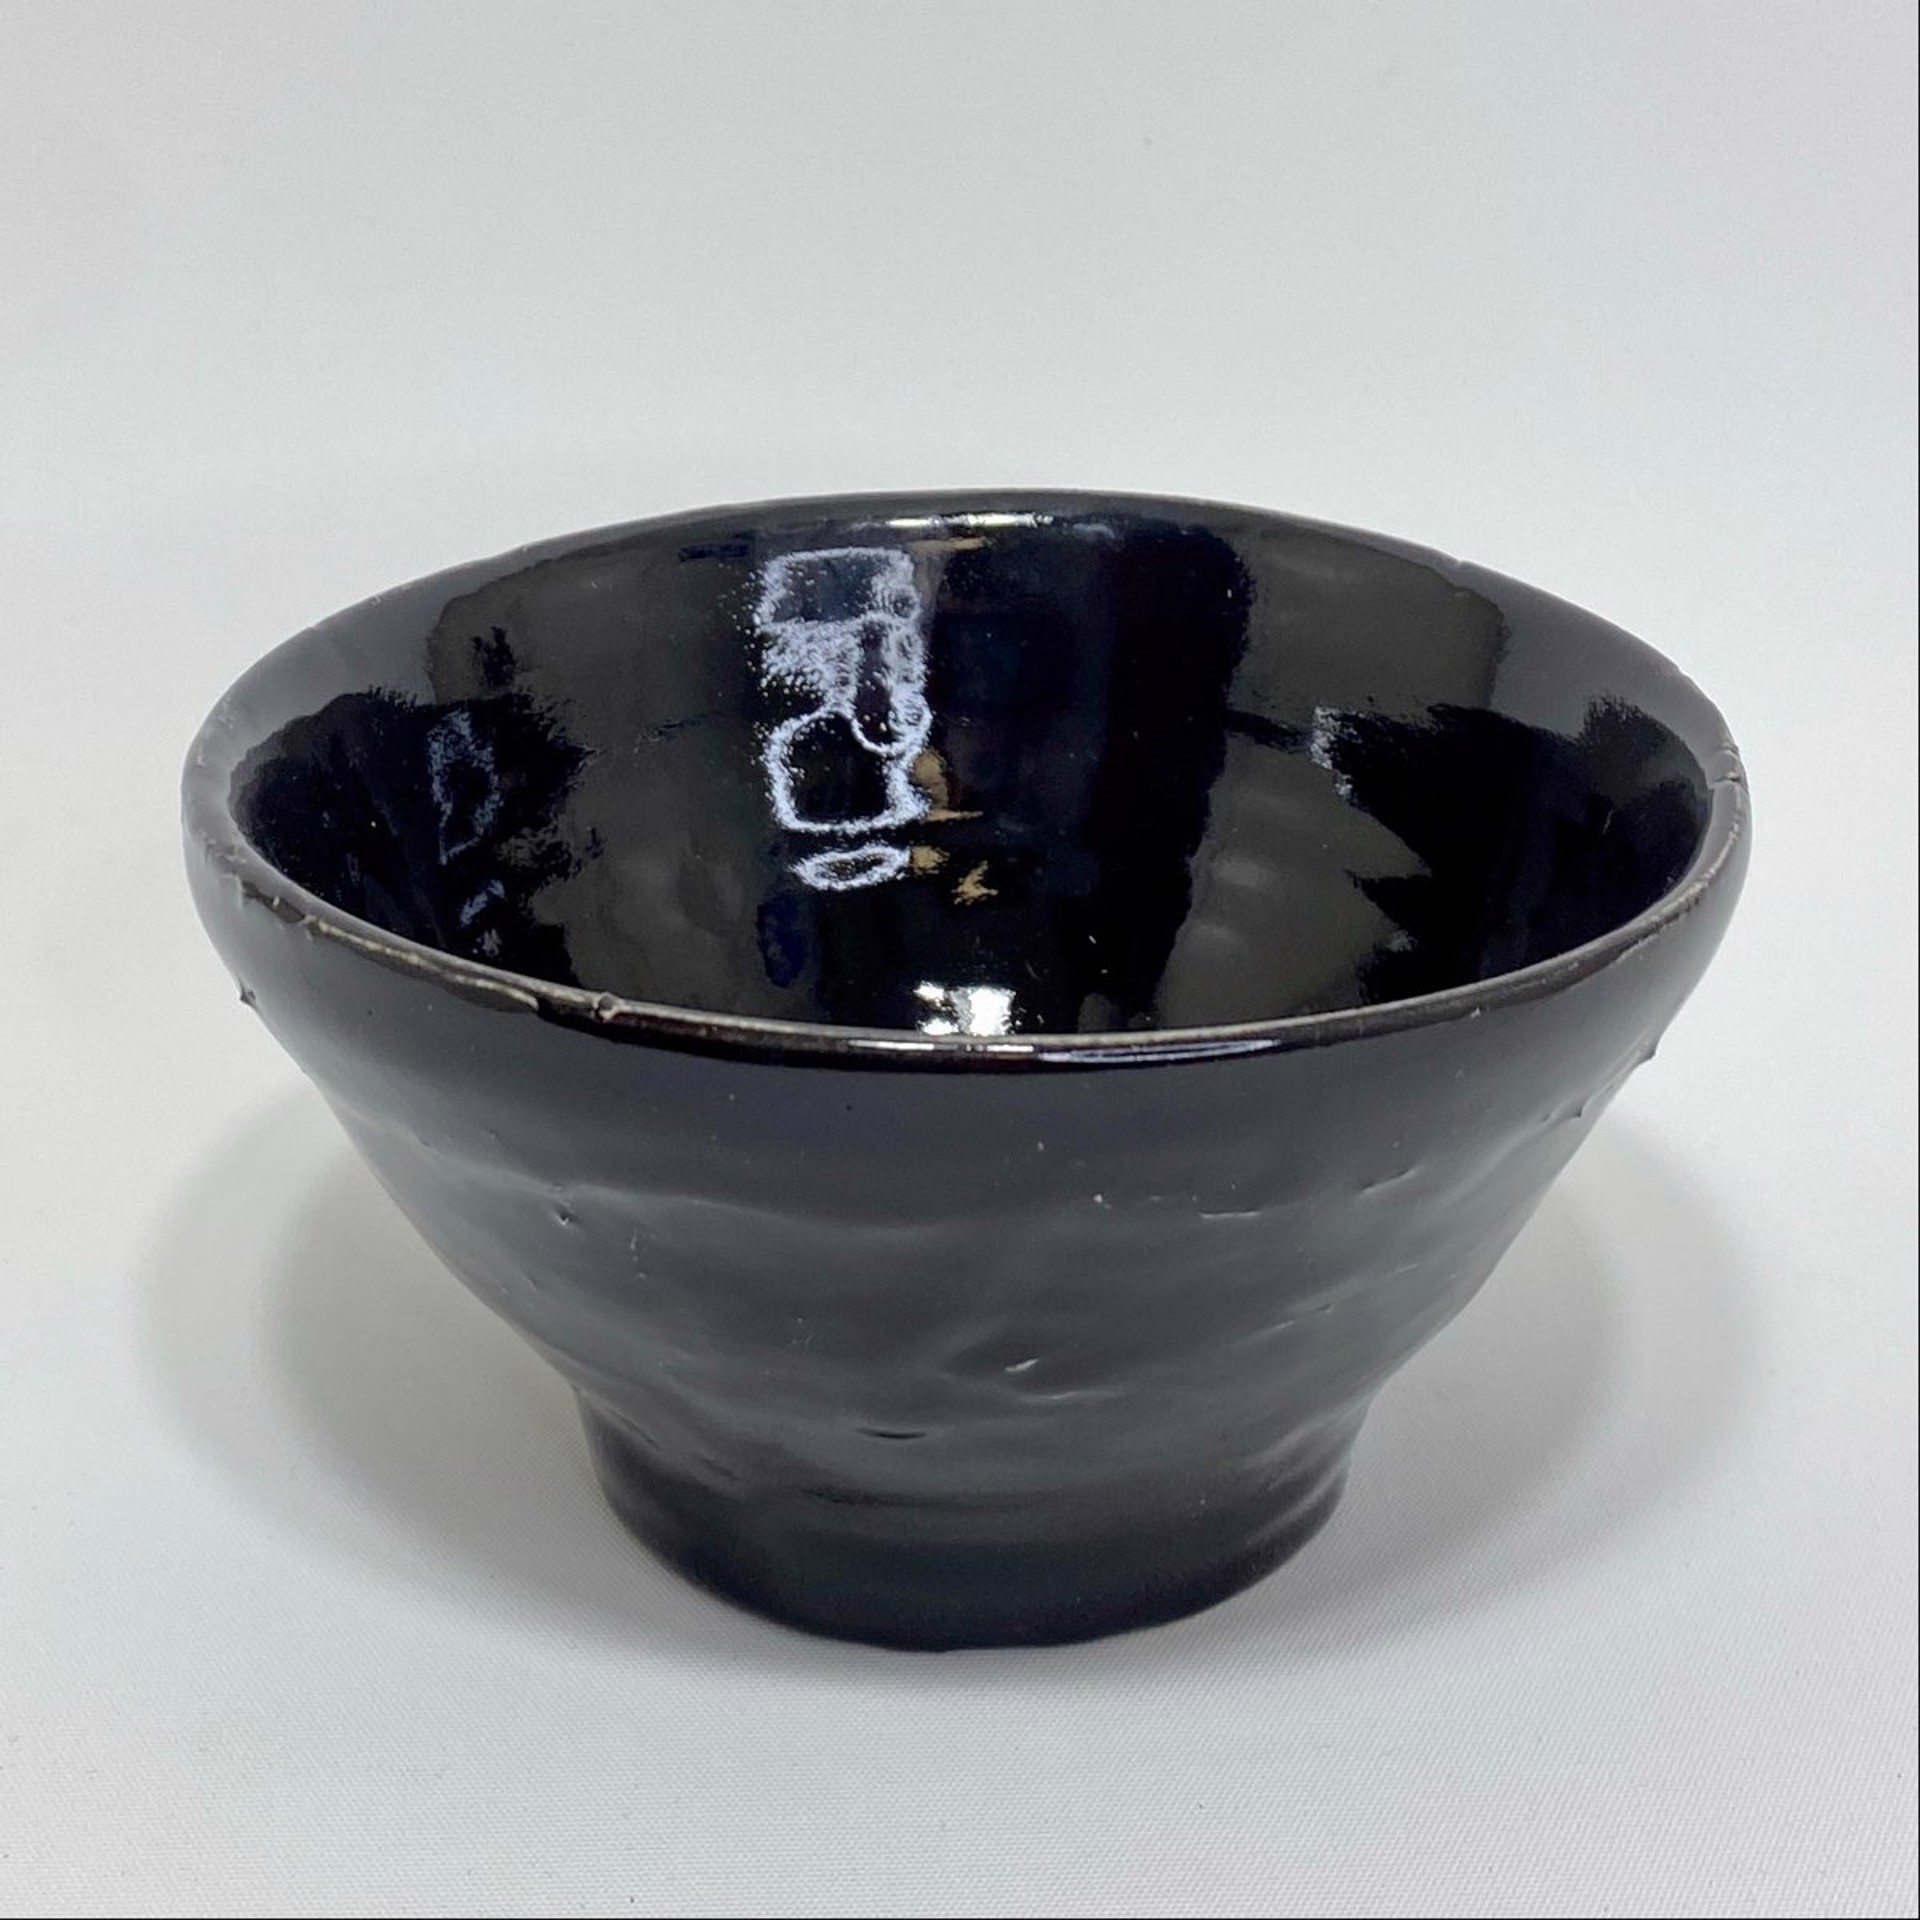 "Small Black Bowl" by Laura B. by One Step Beyond